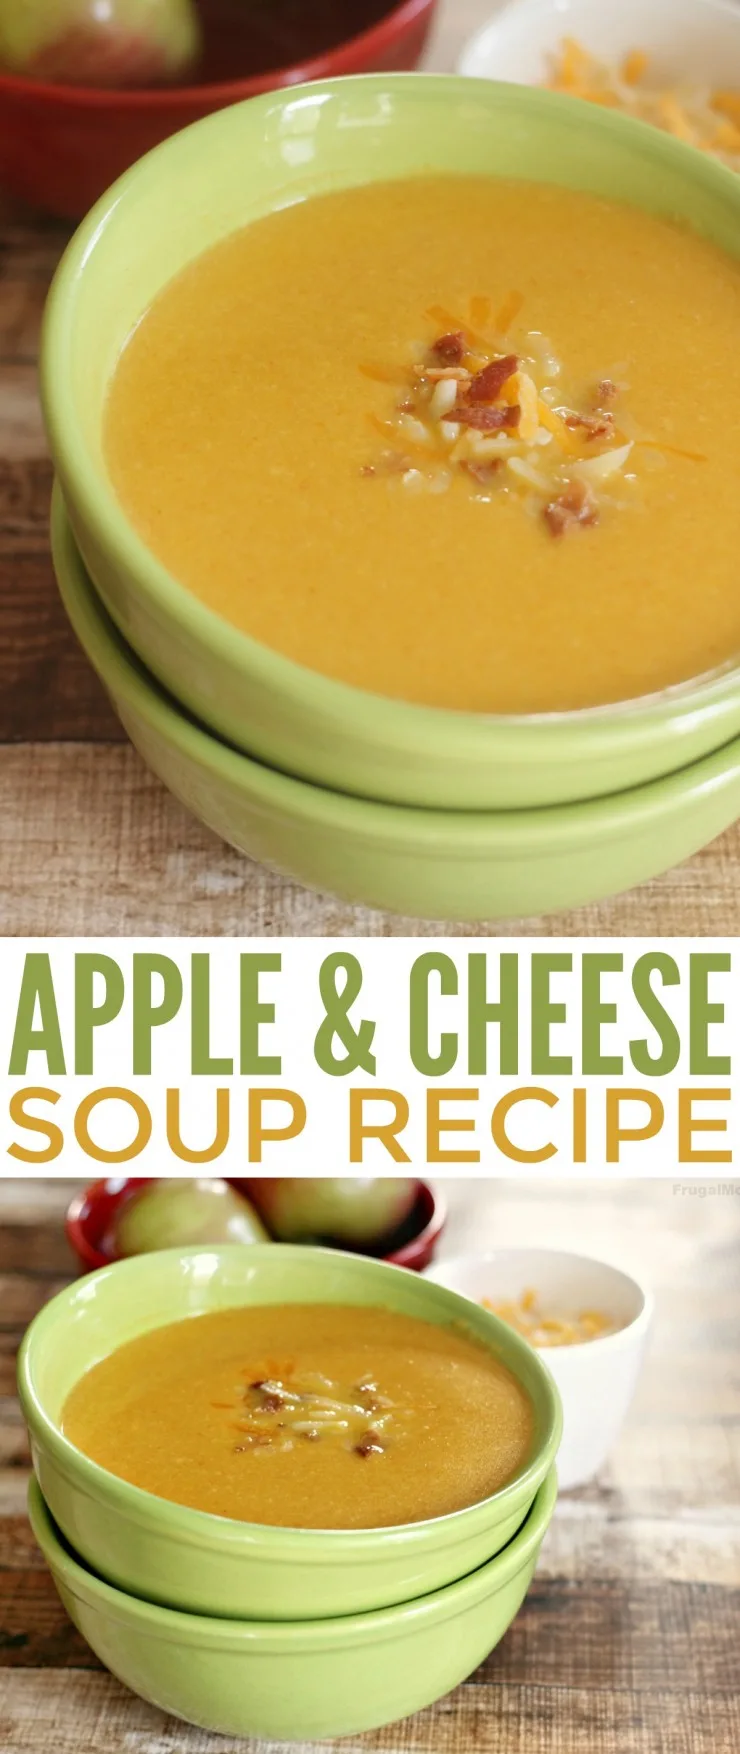 This Apple & Cheese Soup is a savoury soup with a hint of sweet that is perfect for an autumn dinner. This soup recipe can easily be made vegetarian too.